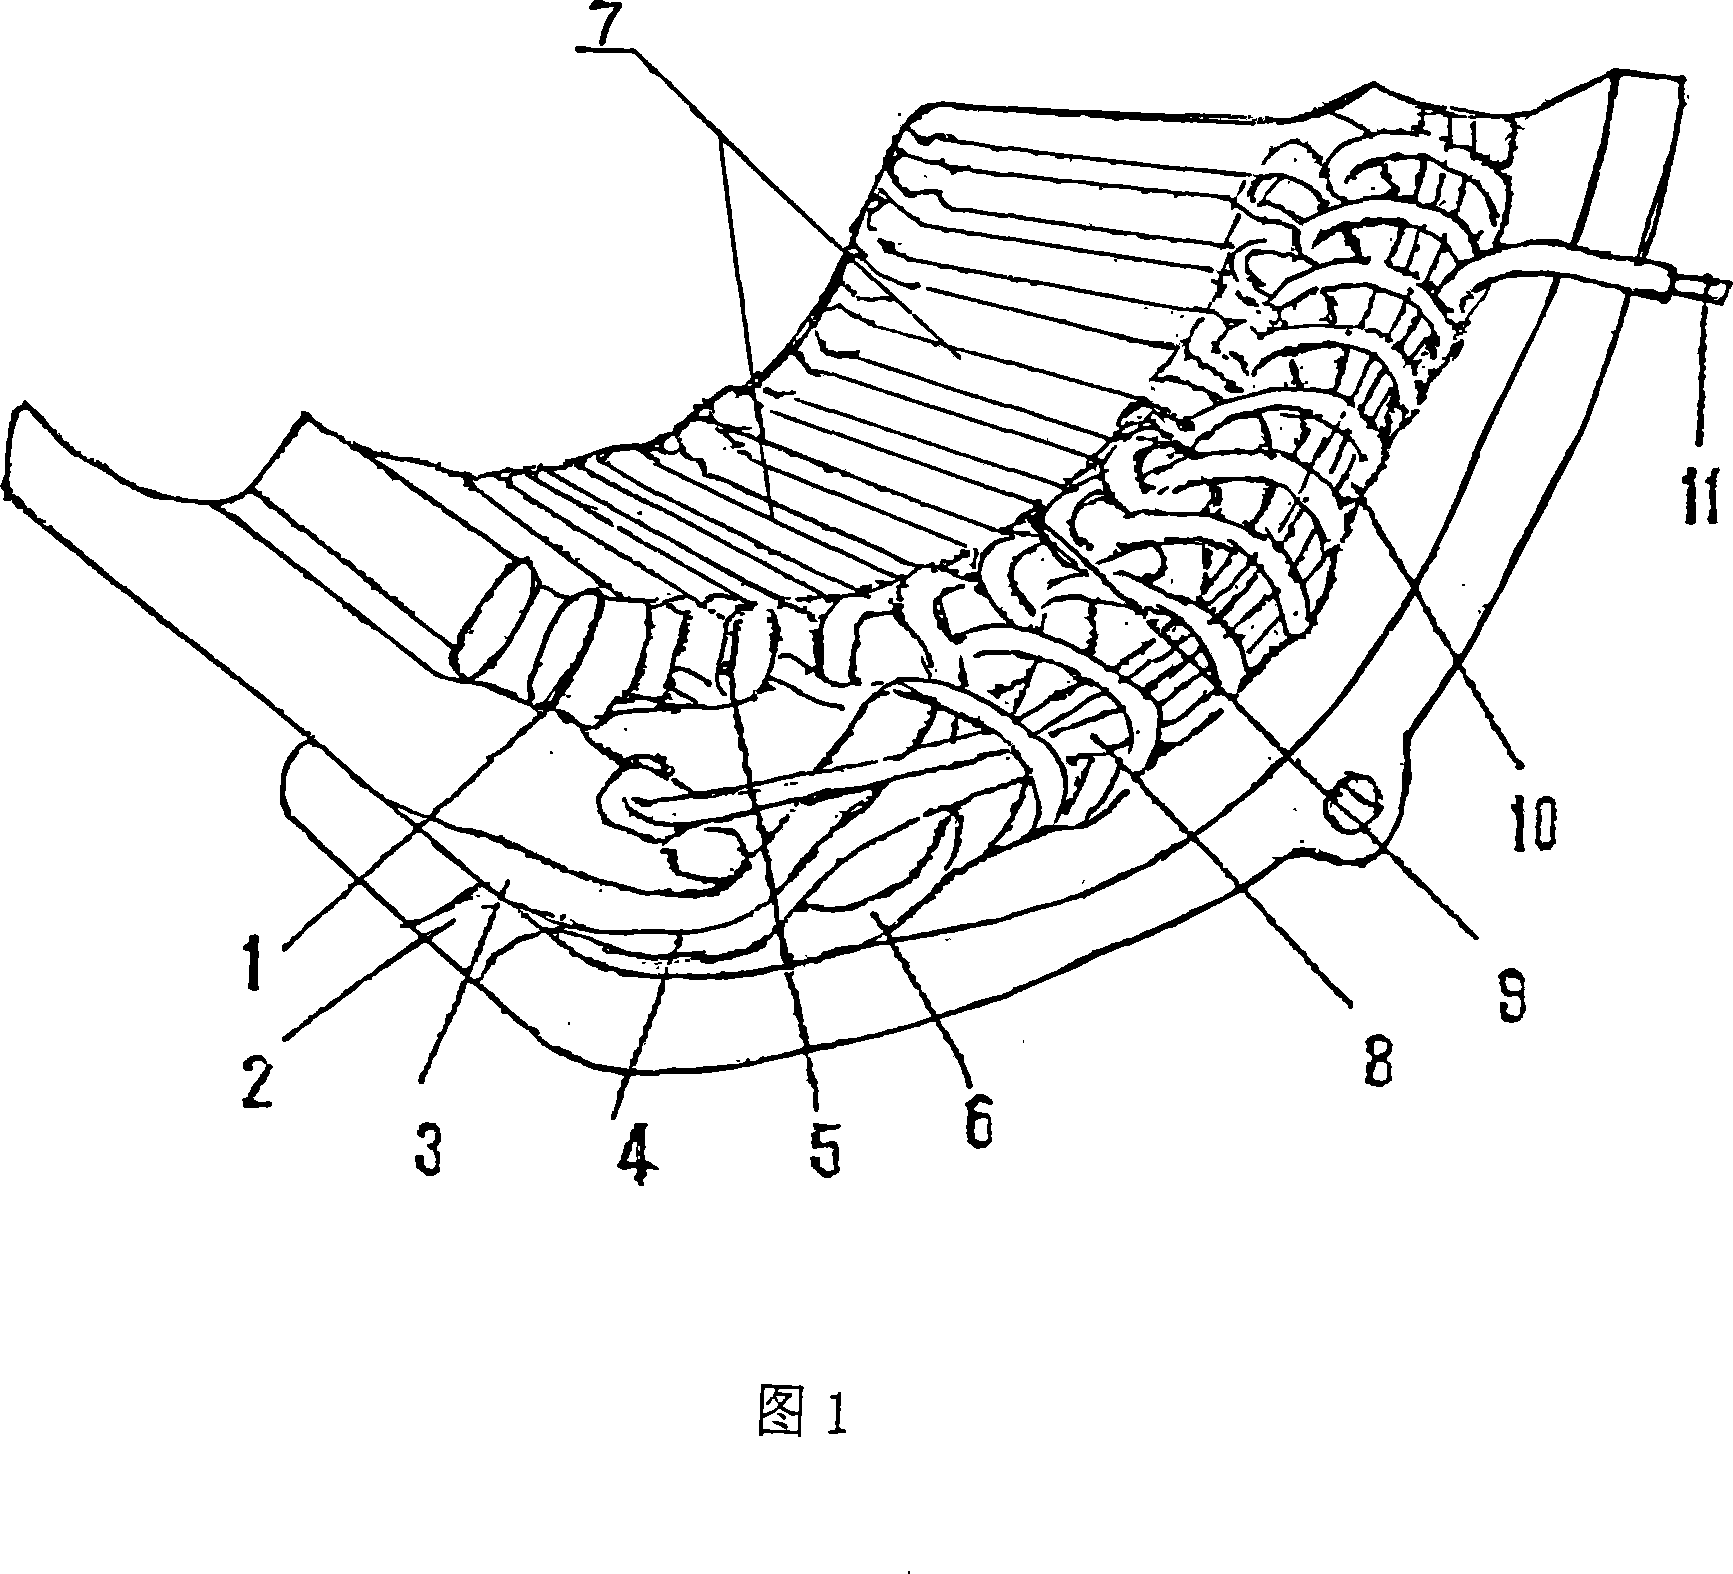 Insulating system with double-strength, zero-air-gap and corona resistance for electric motor of non-gear permanent-magnetic tractor